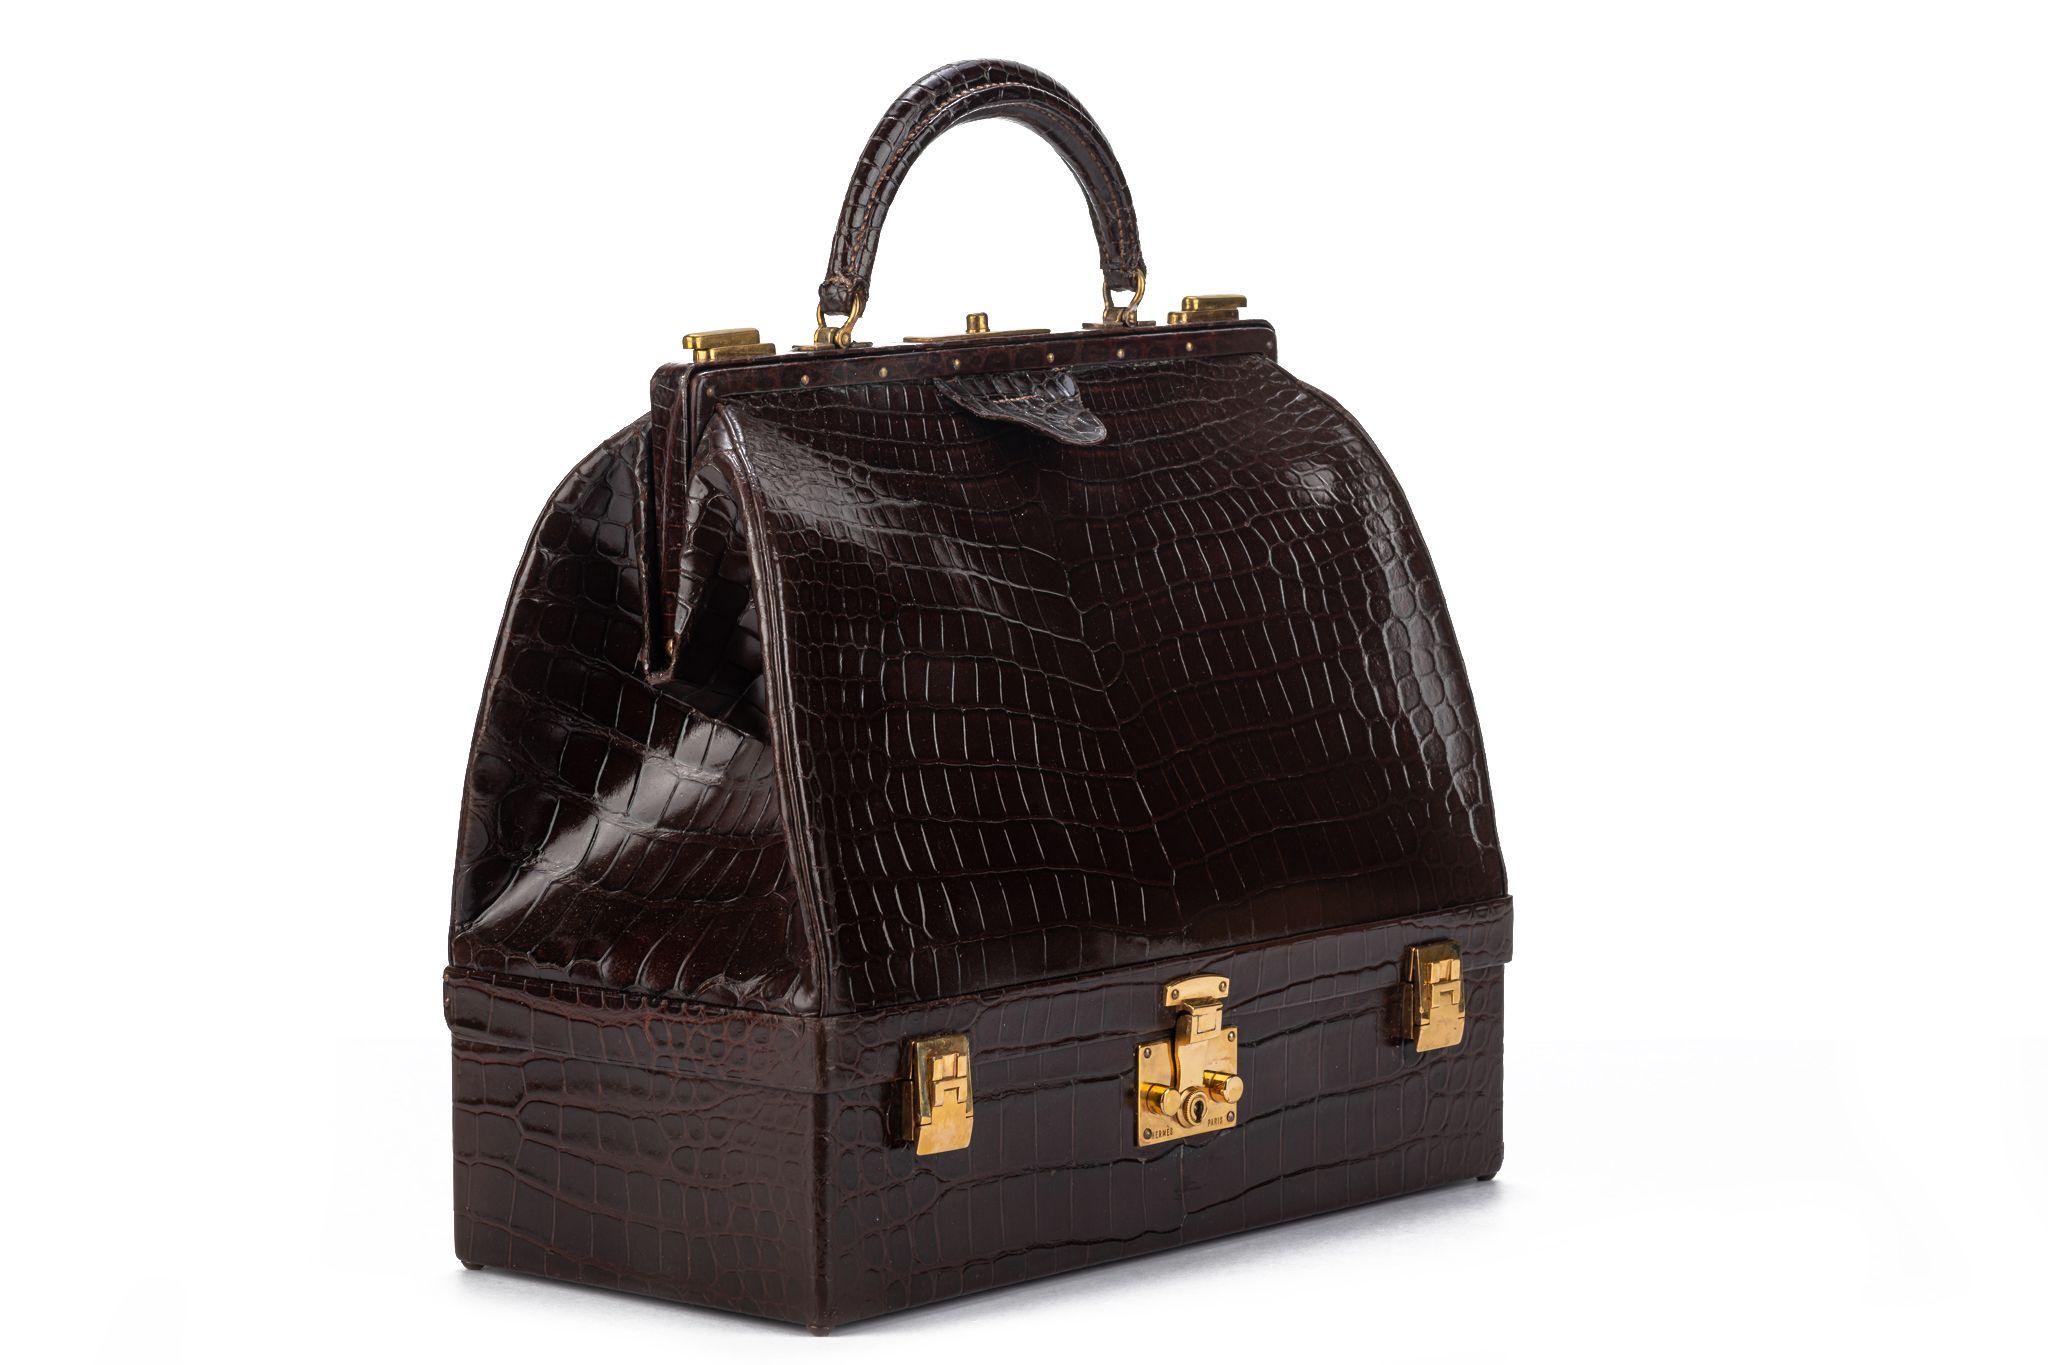 Hermes rare and collectible large doctor’s bag in brown shiny croc, lined in brown leather and caramel velvet, gold tone hardware. Dates back to the 50s , pre date stamp. Handle drop 2.5”. Recently received spa service. 
Original box. No cites .